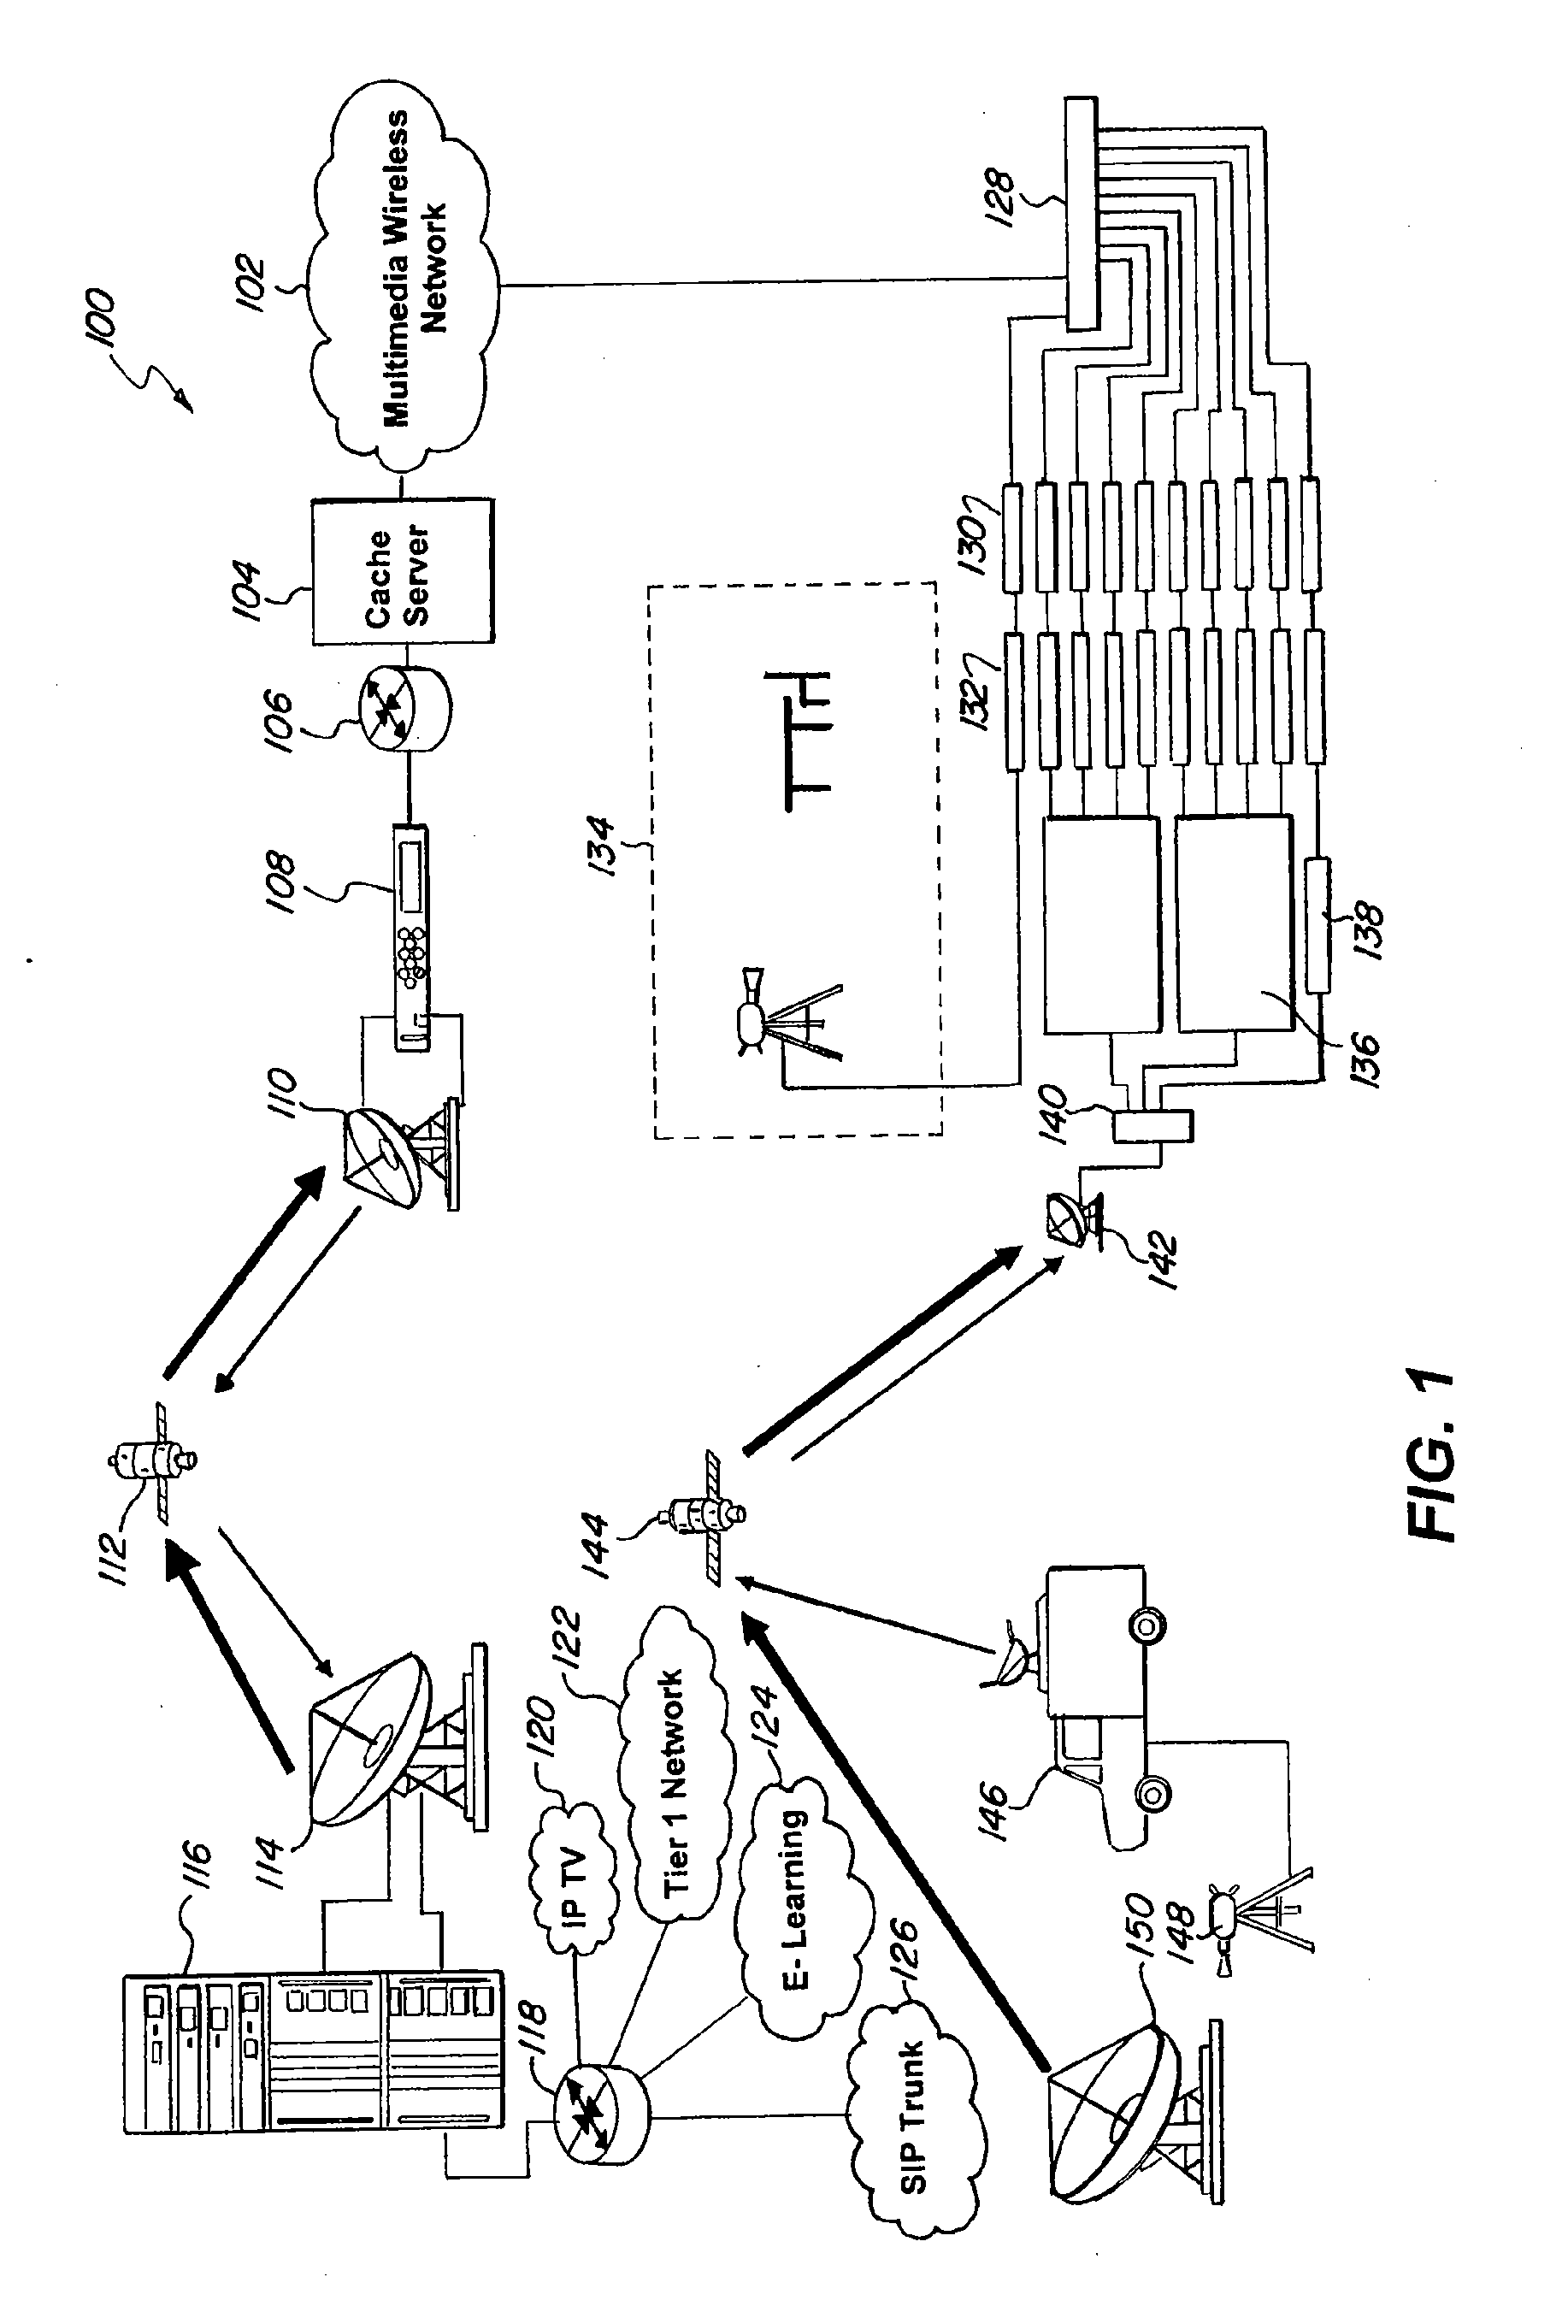 Method and system for providing information access, multimedia content access, and phone connectivity